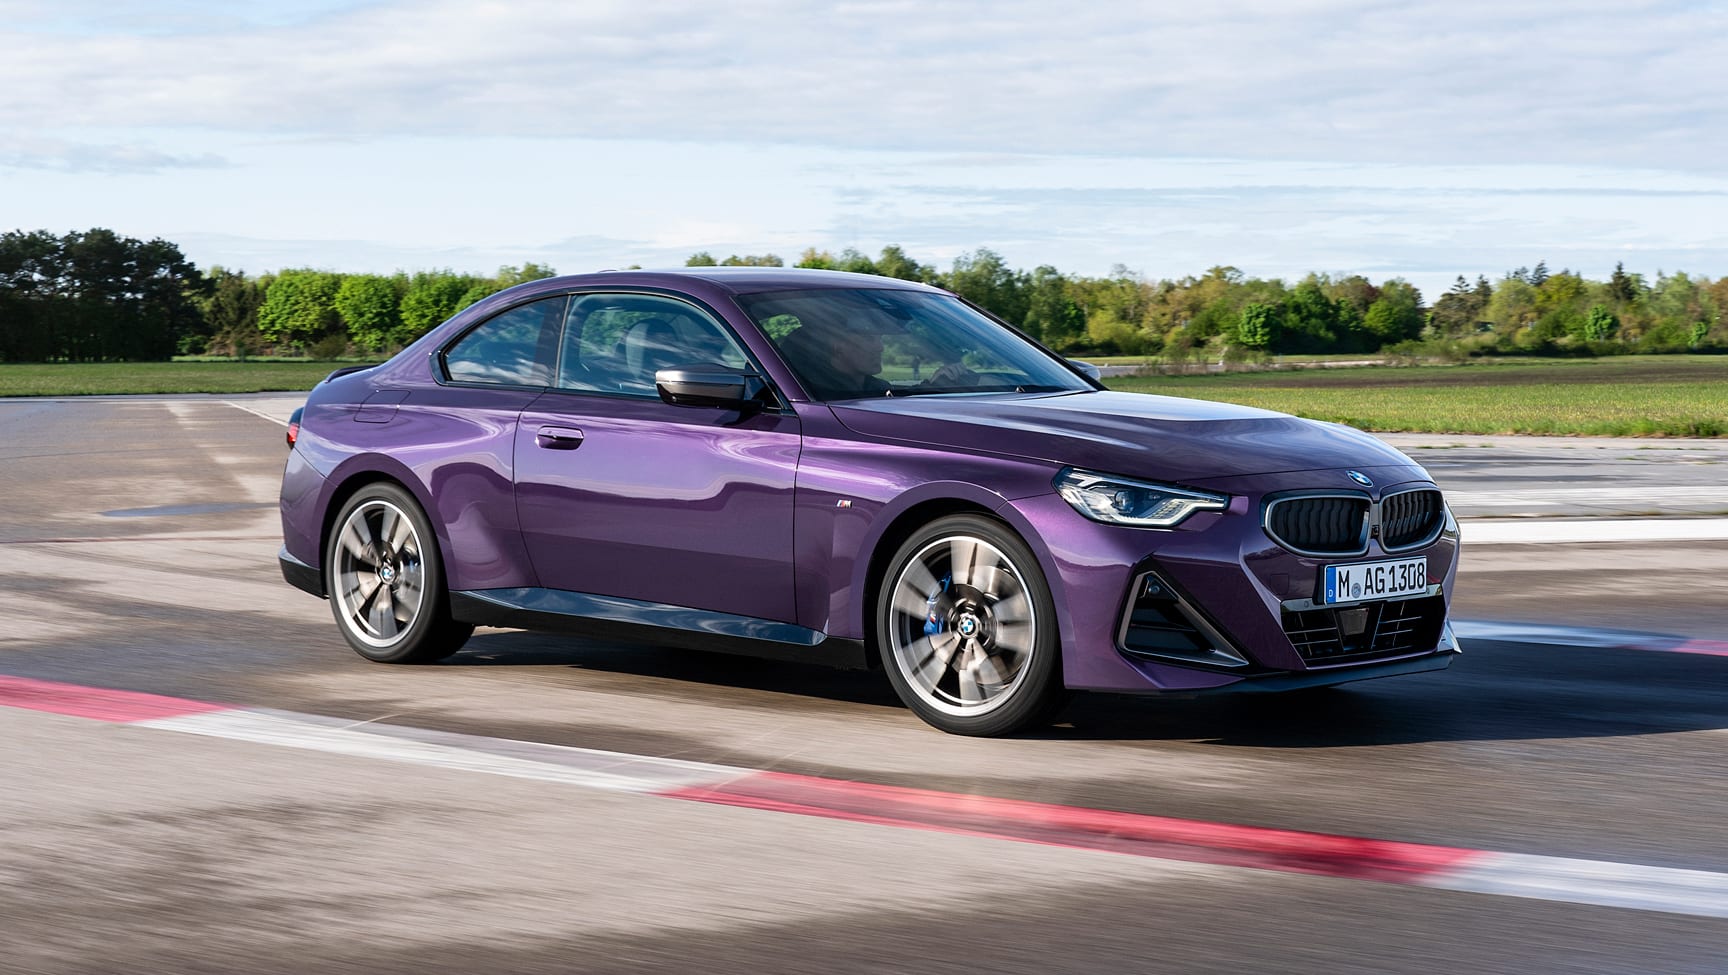 2022 BMW 2 Series Coupe price and features: Performance-focused